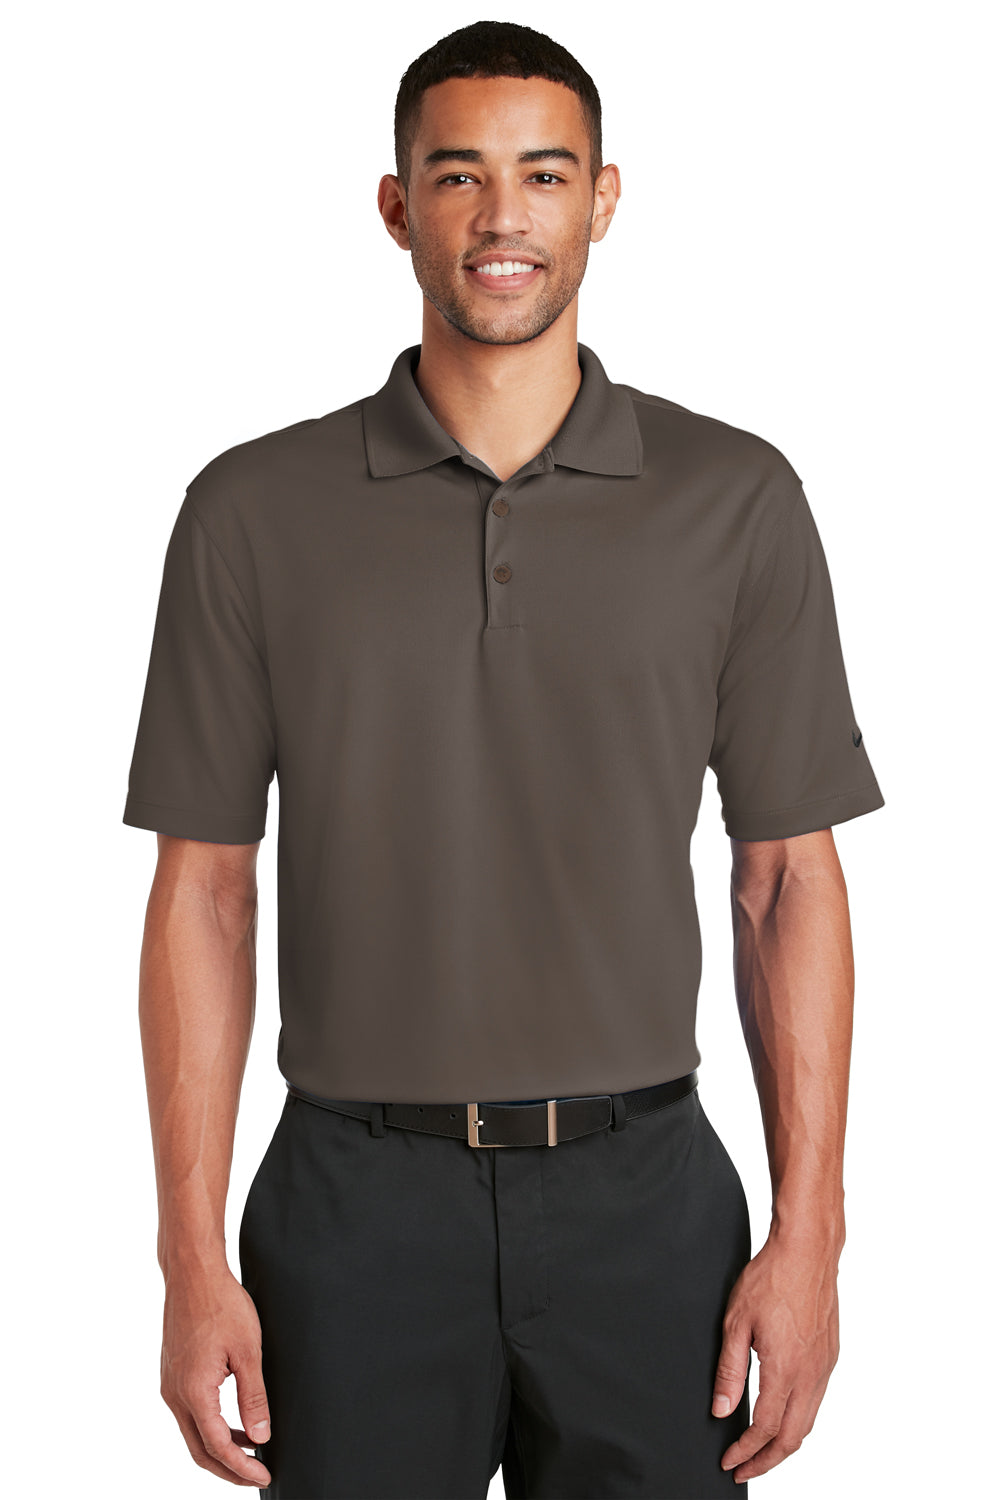 Nike 363807 Mens Dri-Fit Moisture Wicking Short Sleeve Polo Shirt Brown Front